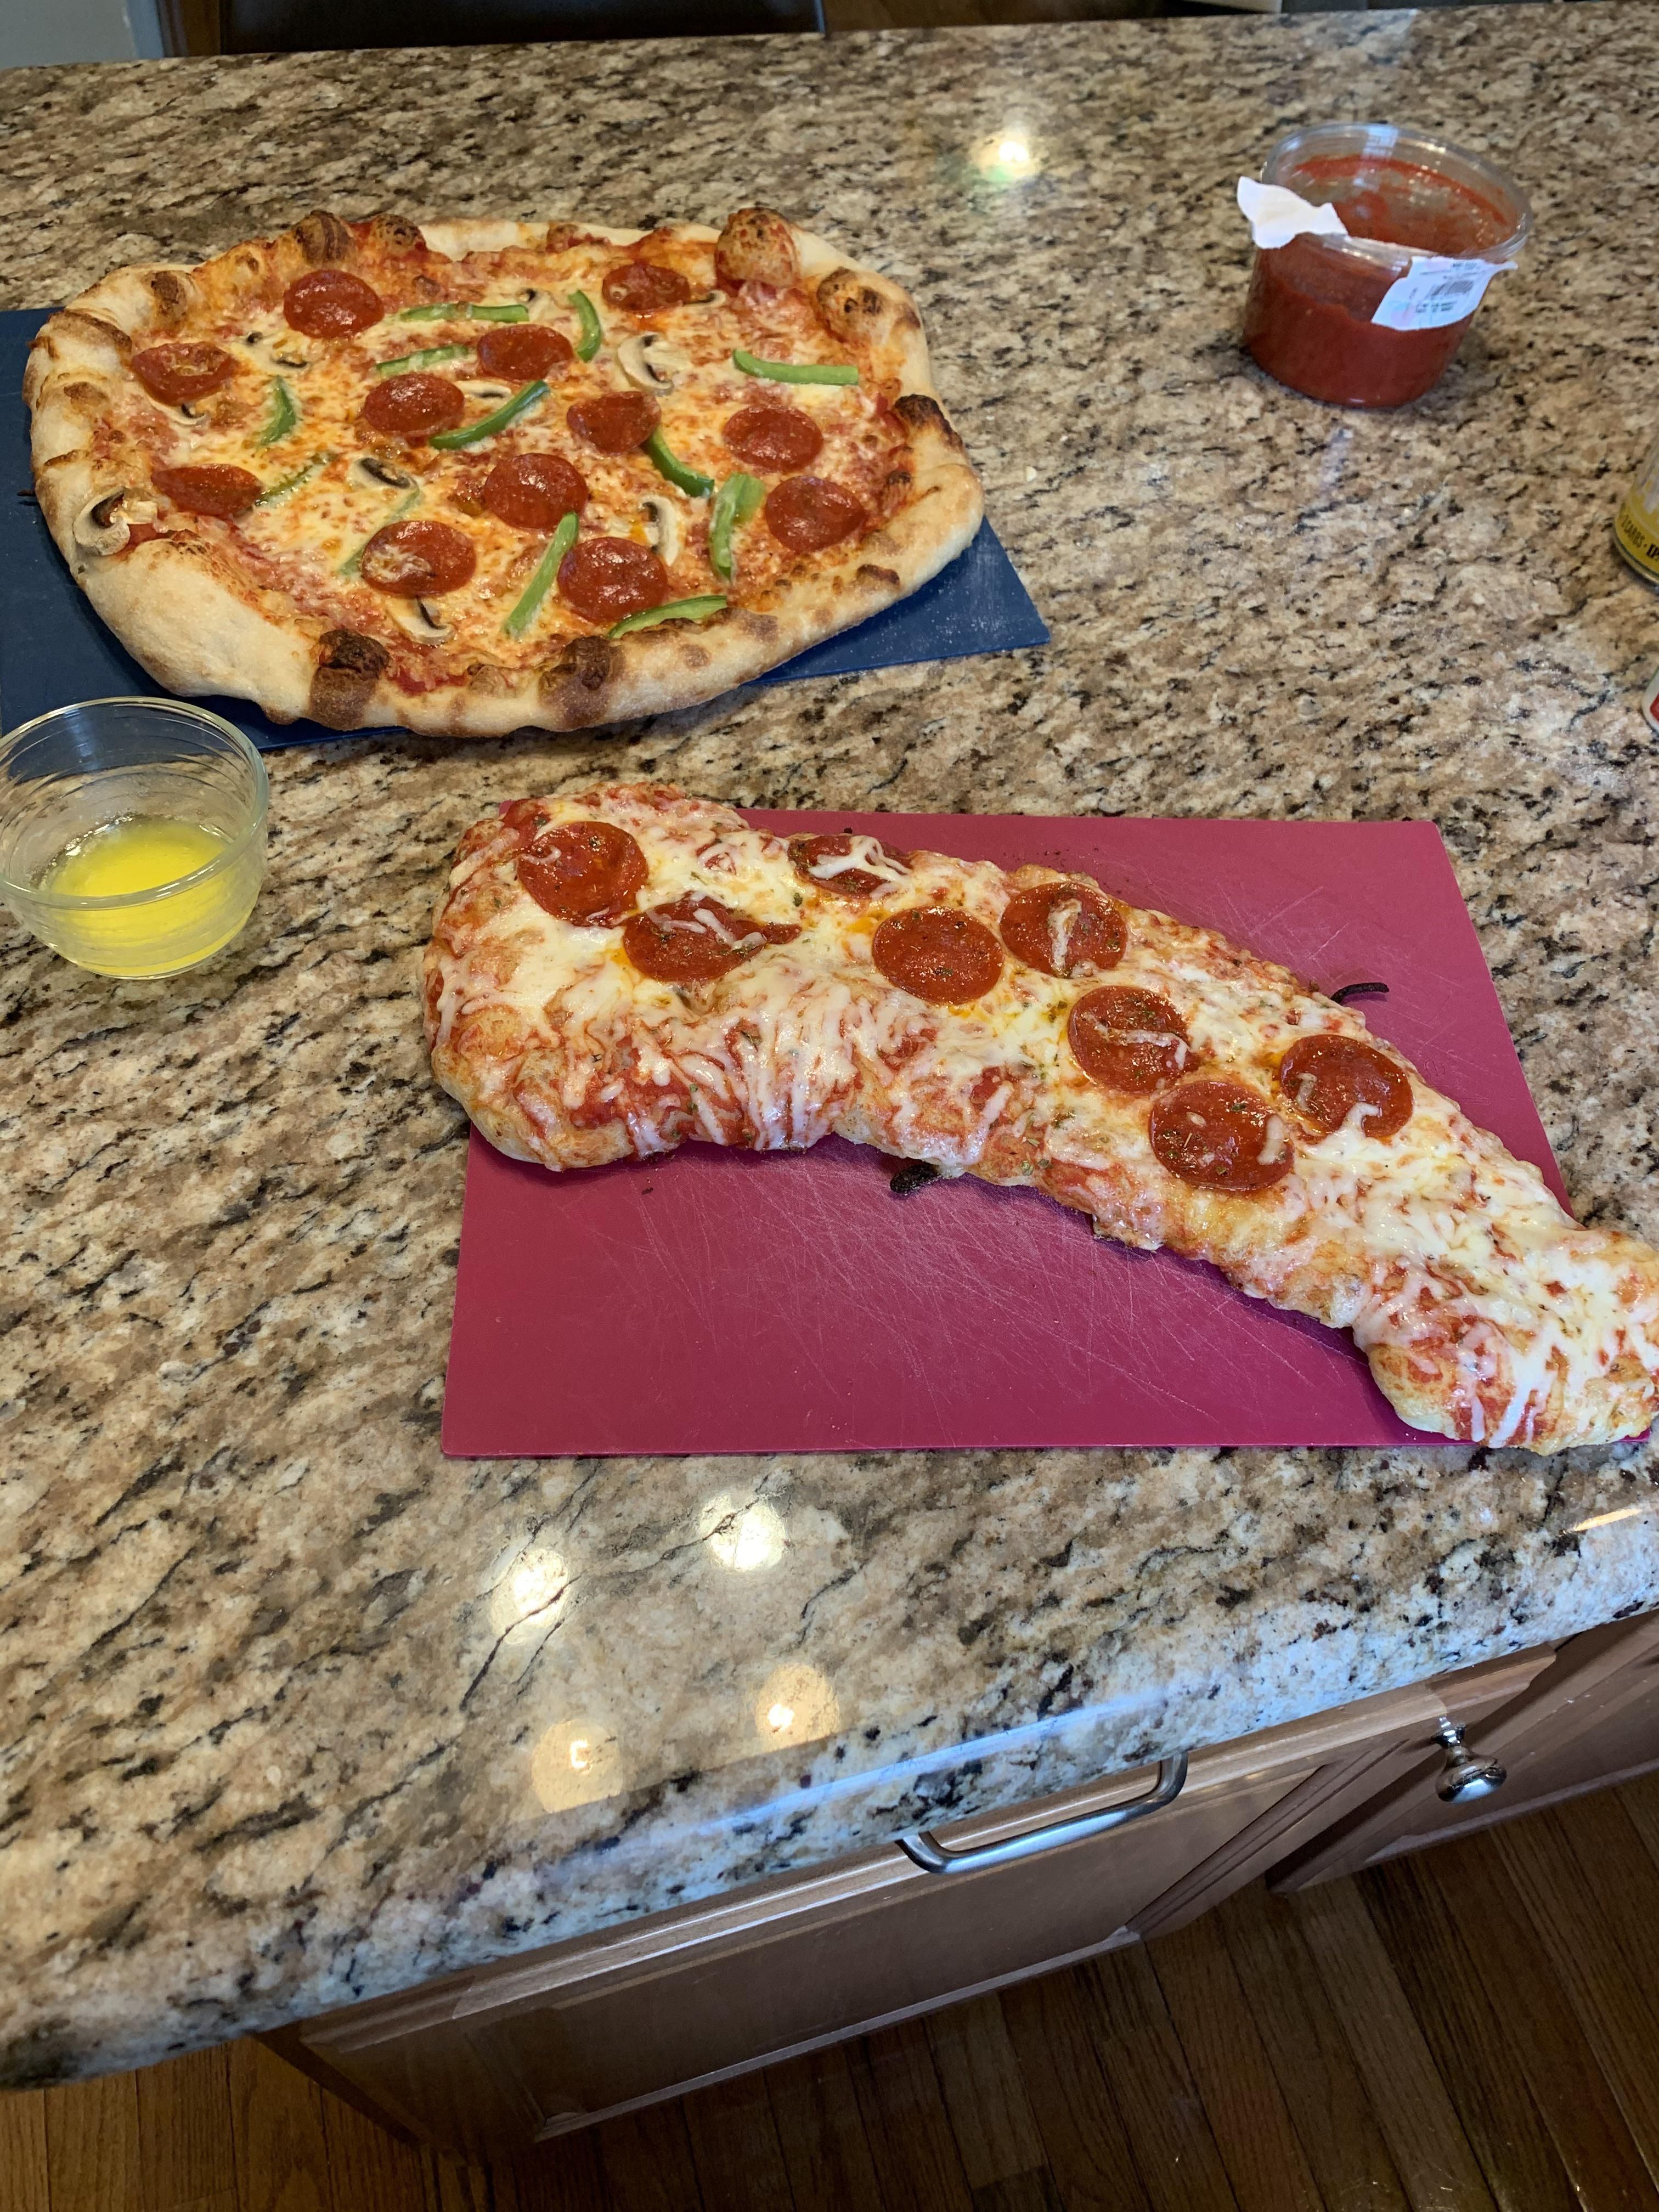 My wife wanted to do her own pizza…